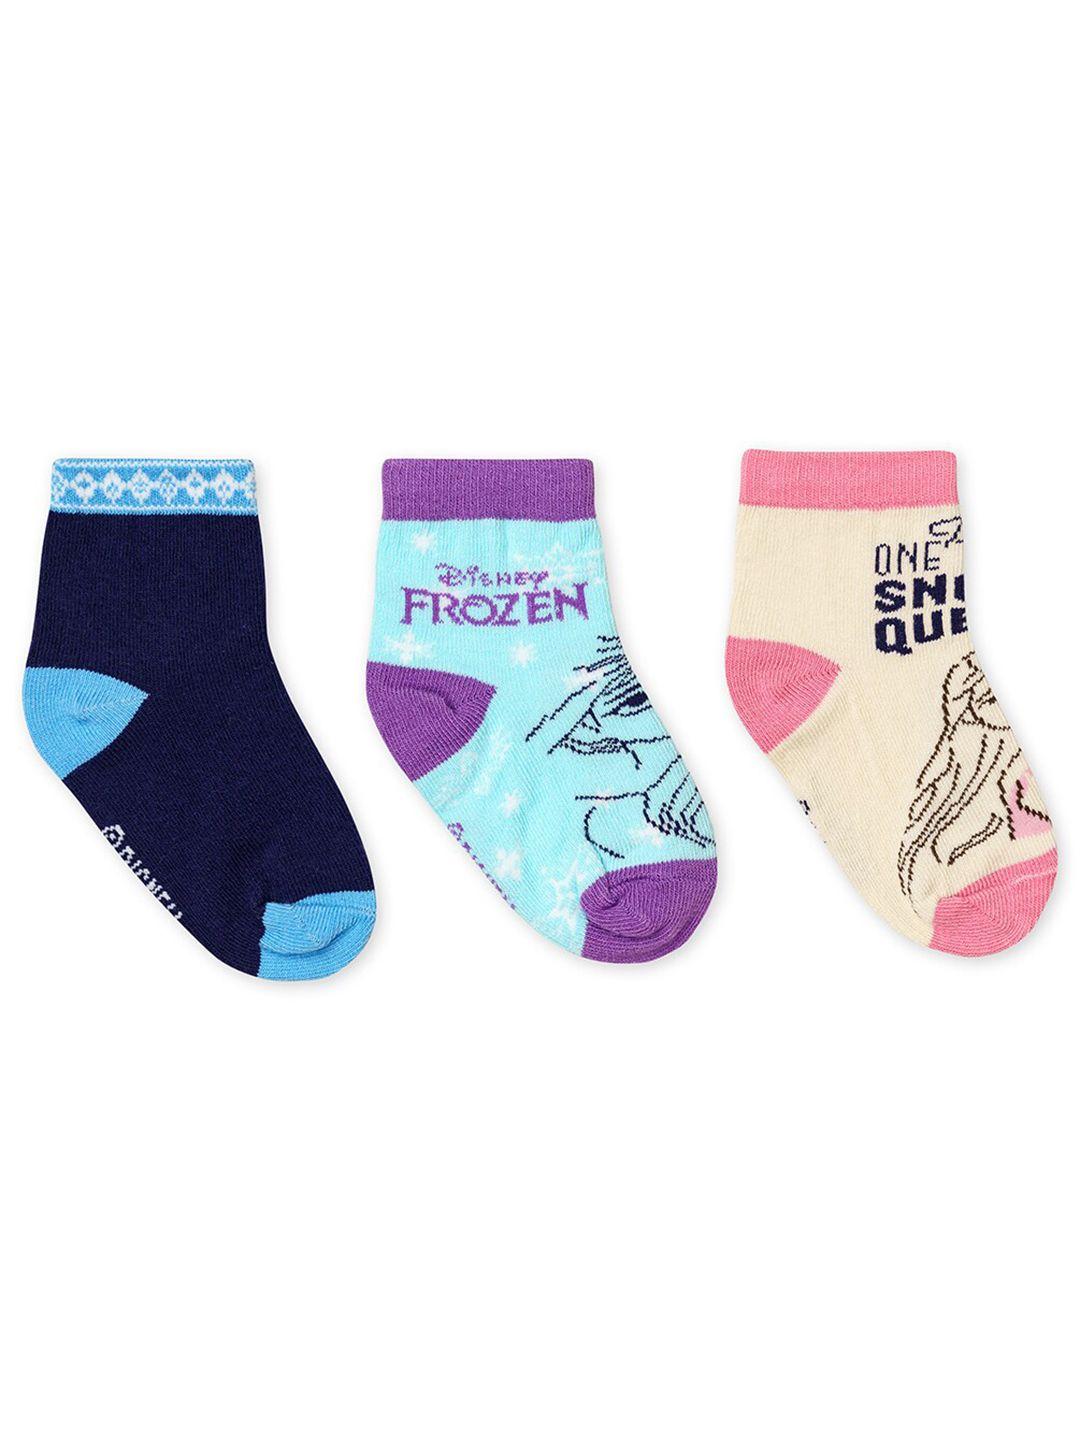 h-by-hamleys-infants-girls-pack-of-3-printed-pure-cotton-calf-length-socks